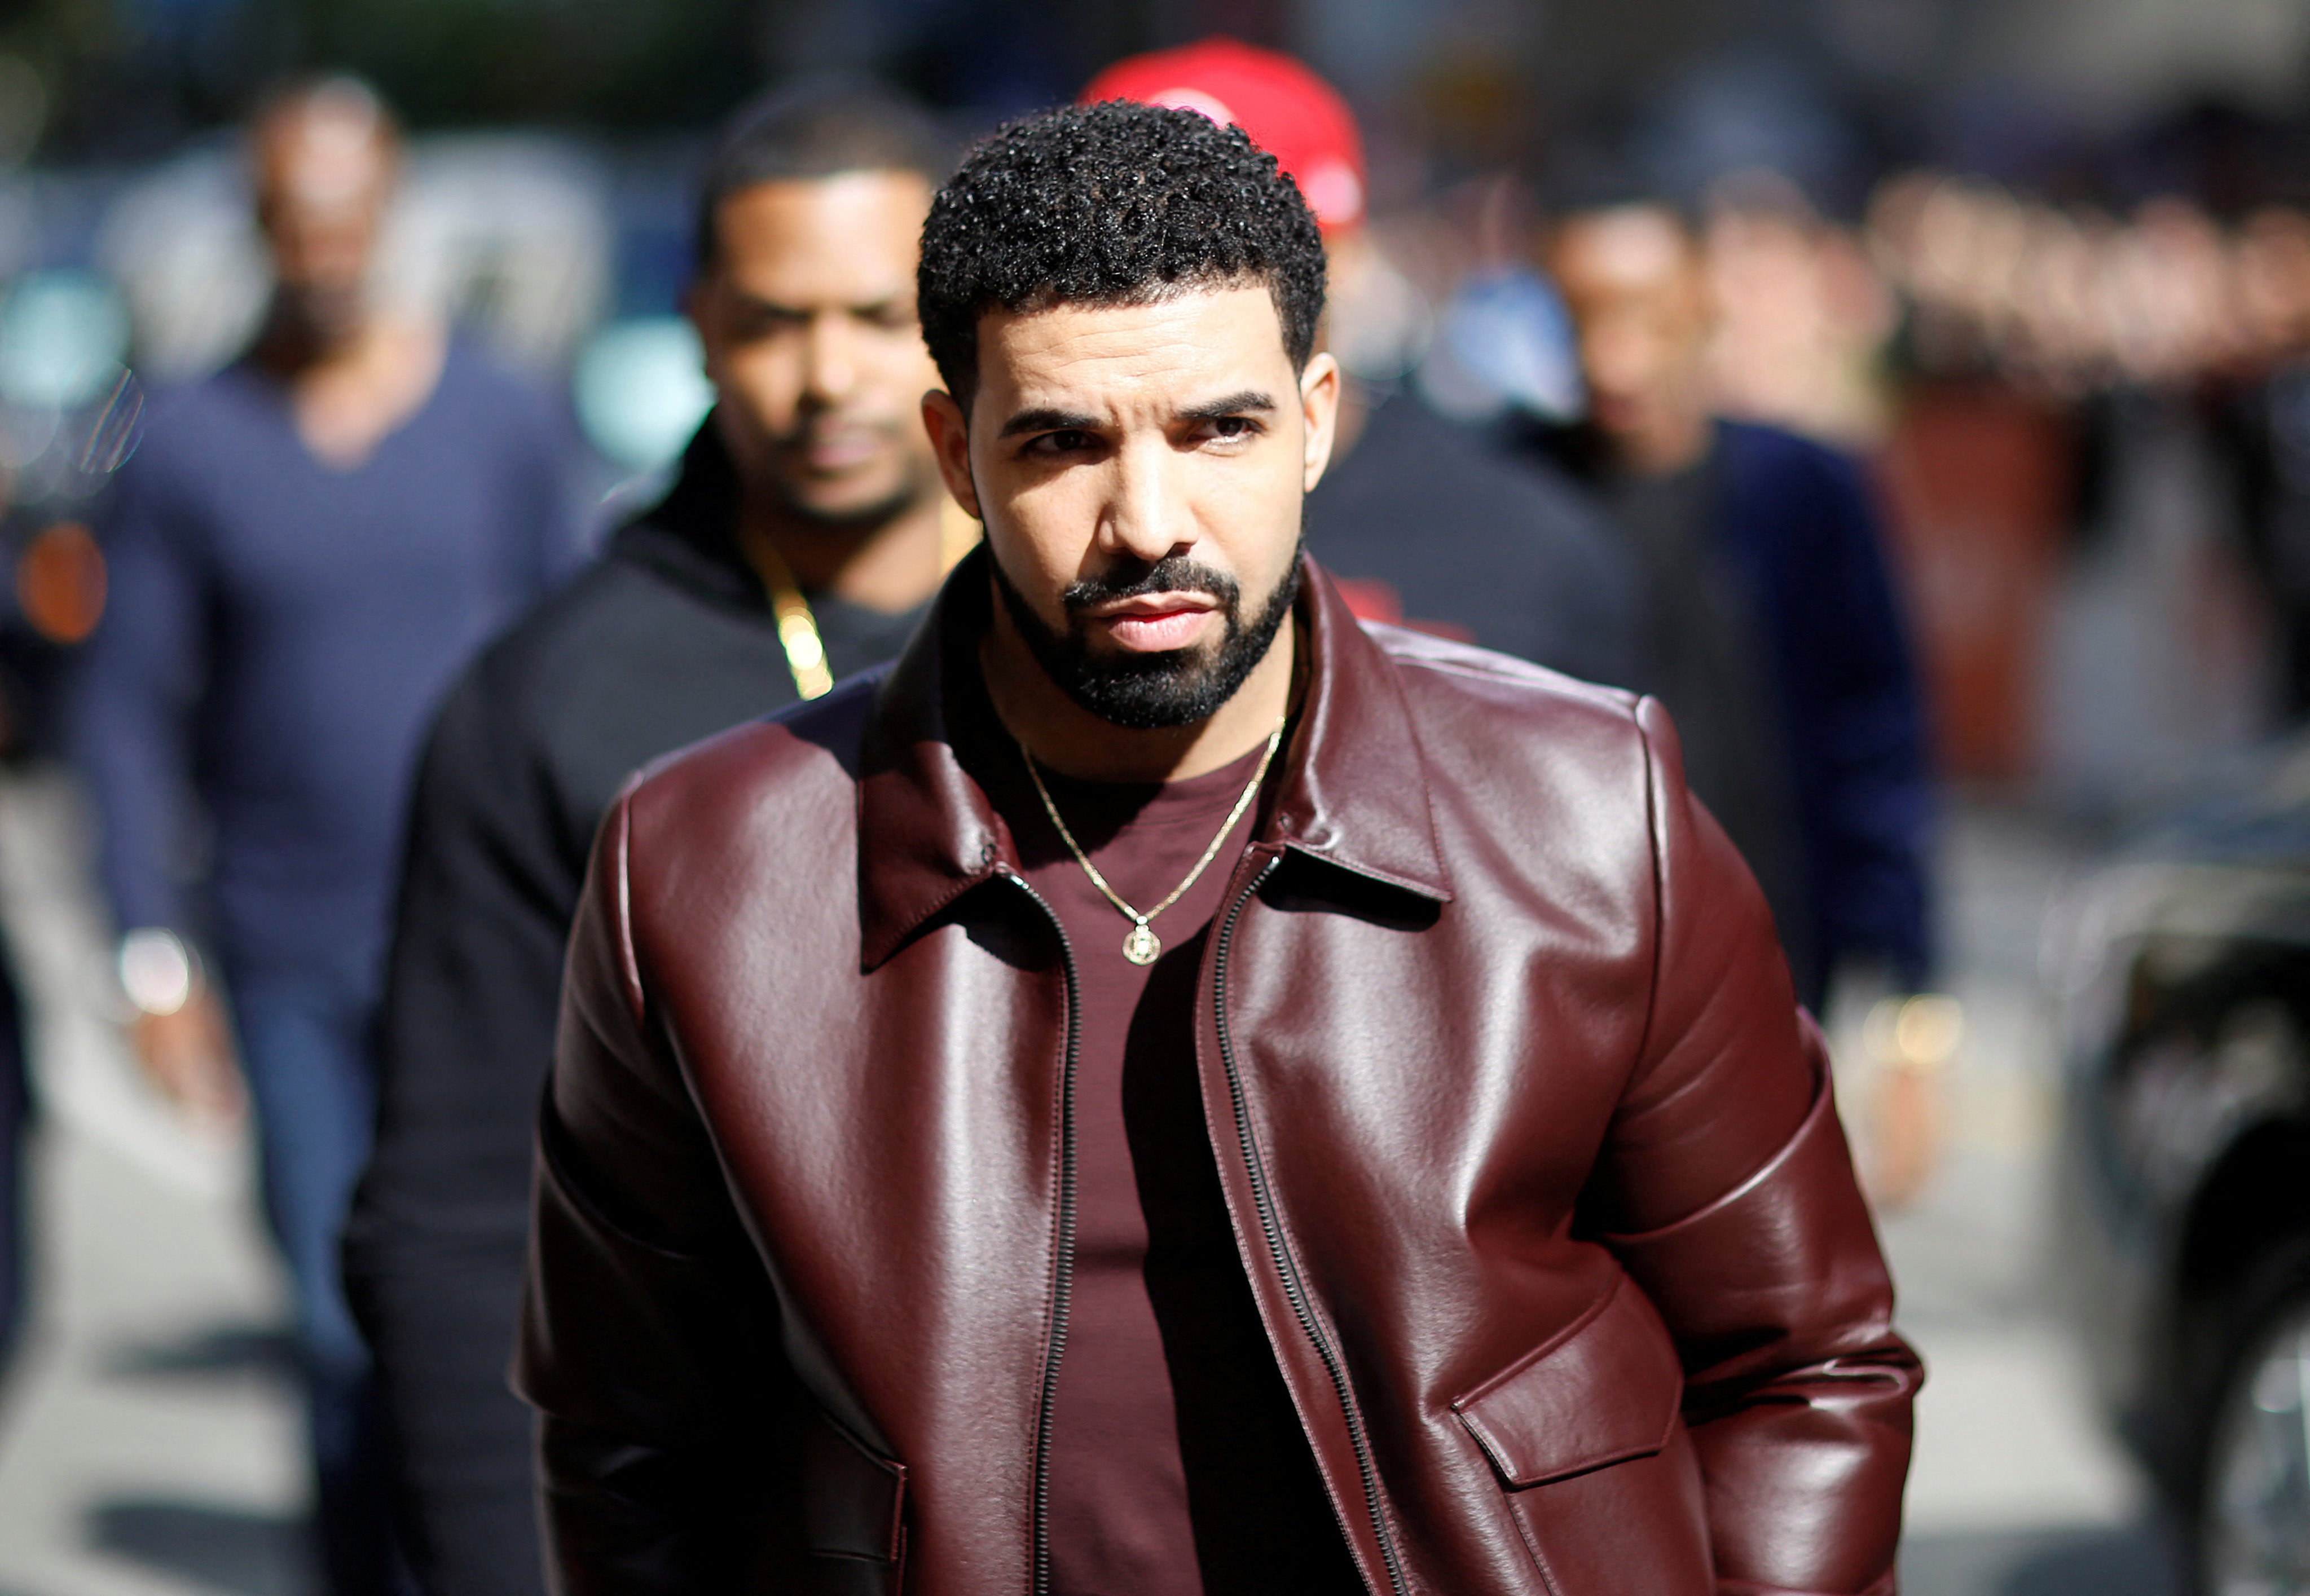 Rapper Drake arrives on the red carpet for the film “The Carter Effect” at the Toronto International Film Festival in September 2017. Photo: Reuters